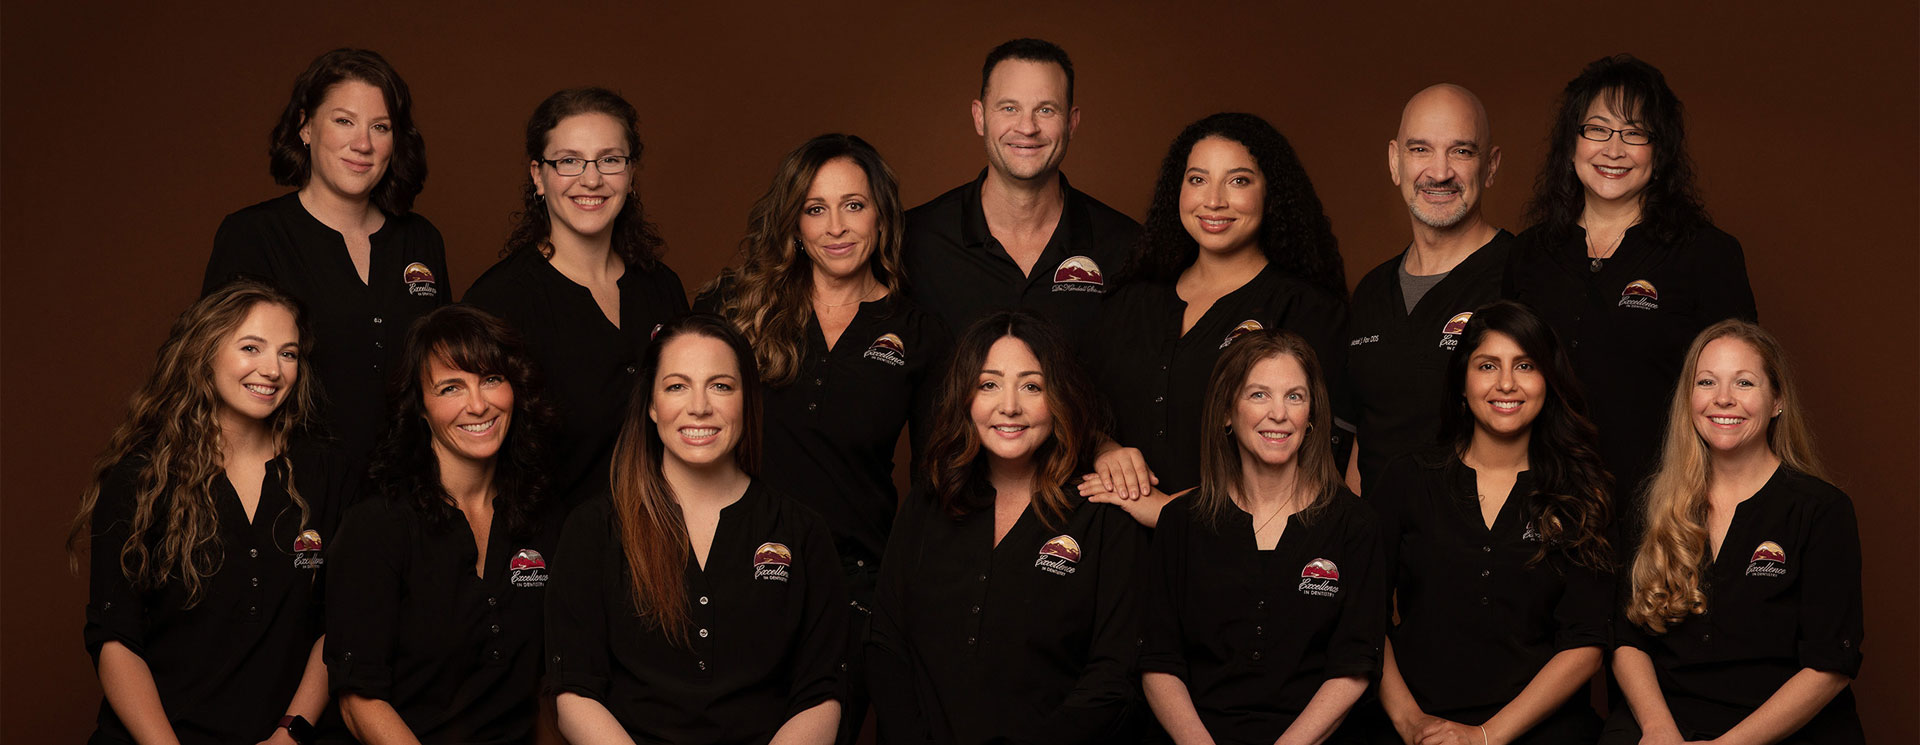 The Anchorage team of Excellence in Dentistry